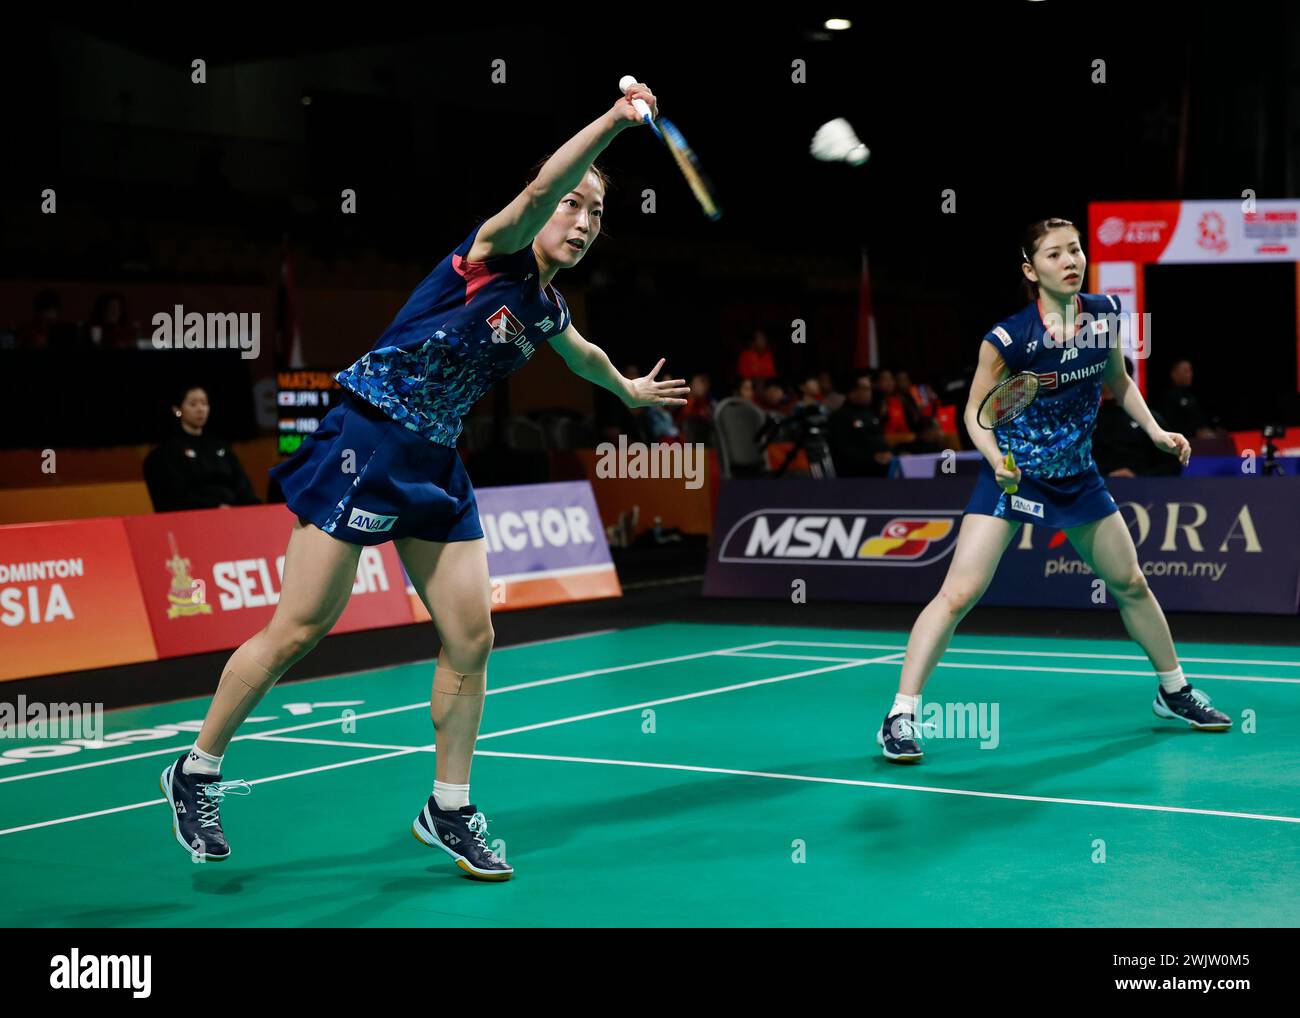 Shah Alam, Malaysia. 17th Feb, 2024. Matsuyama Nami(L)/Shida Chiharu of Japan compete in the doubles match against Treesa Jolly/Gayatri Gopichand Pullela of India during the women's team semifinal between Japan and India at the Badminton Asia Team Championships 2024 in Shah Alam, Selangor, Malaysia, Feb. 17, 2024. Credit: FL Wong/Xinhua/Alamy Live News Stock Photo